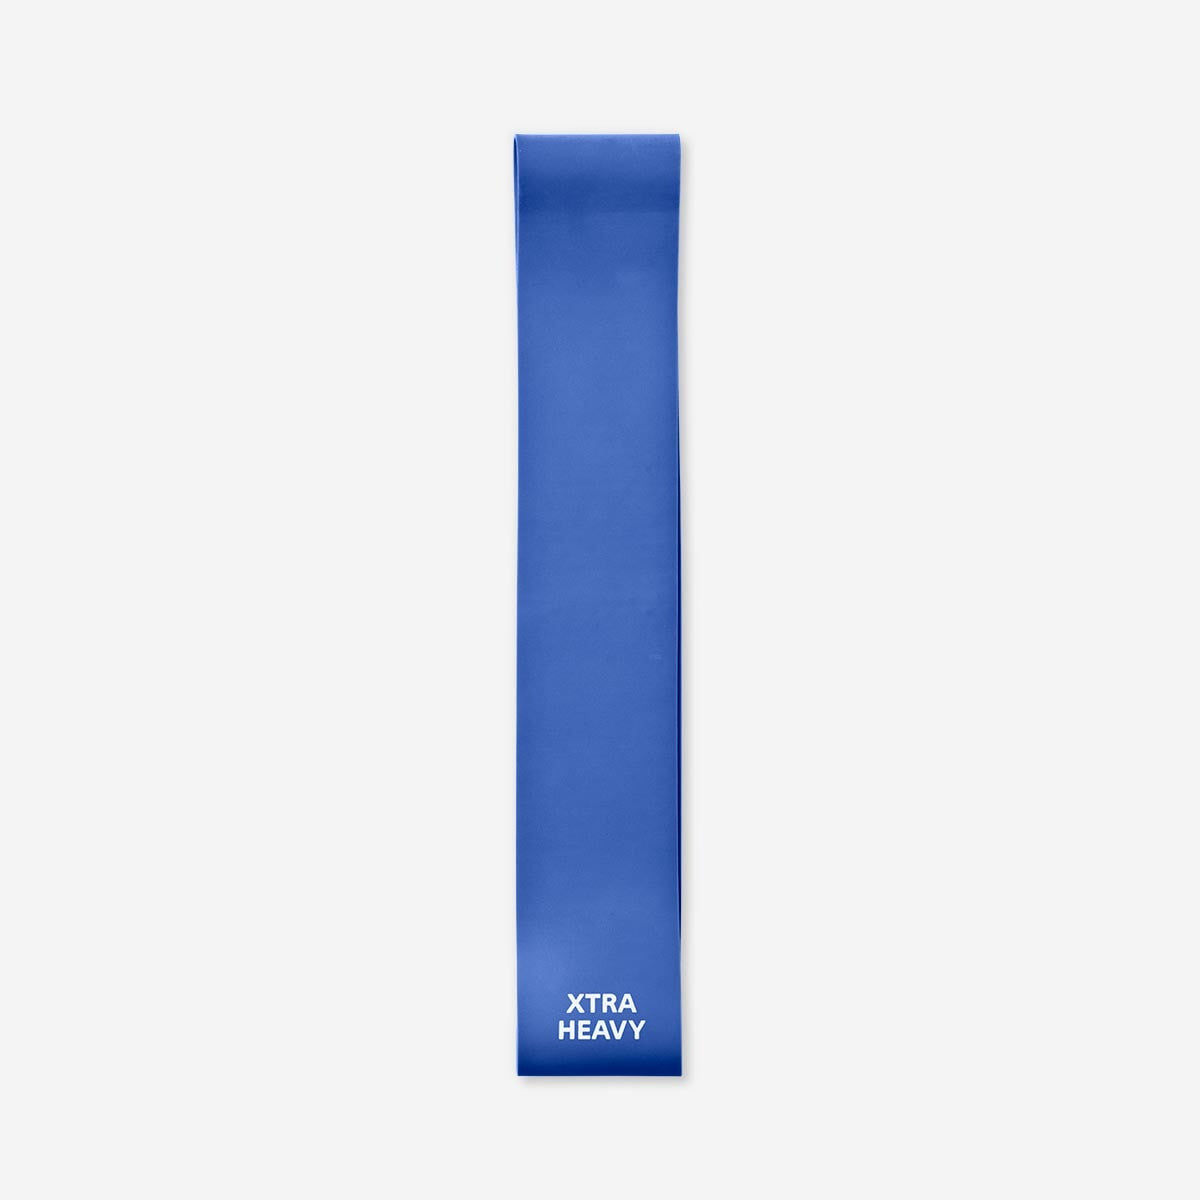 Exercise band. Extra heavy. 1.1mm Leisure Flying Tiger Copenhagen 